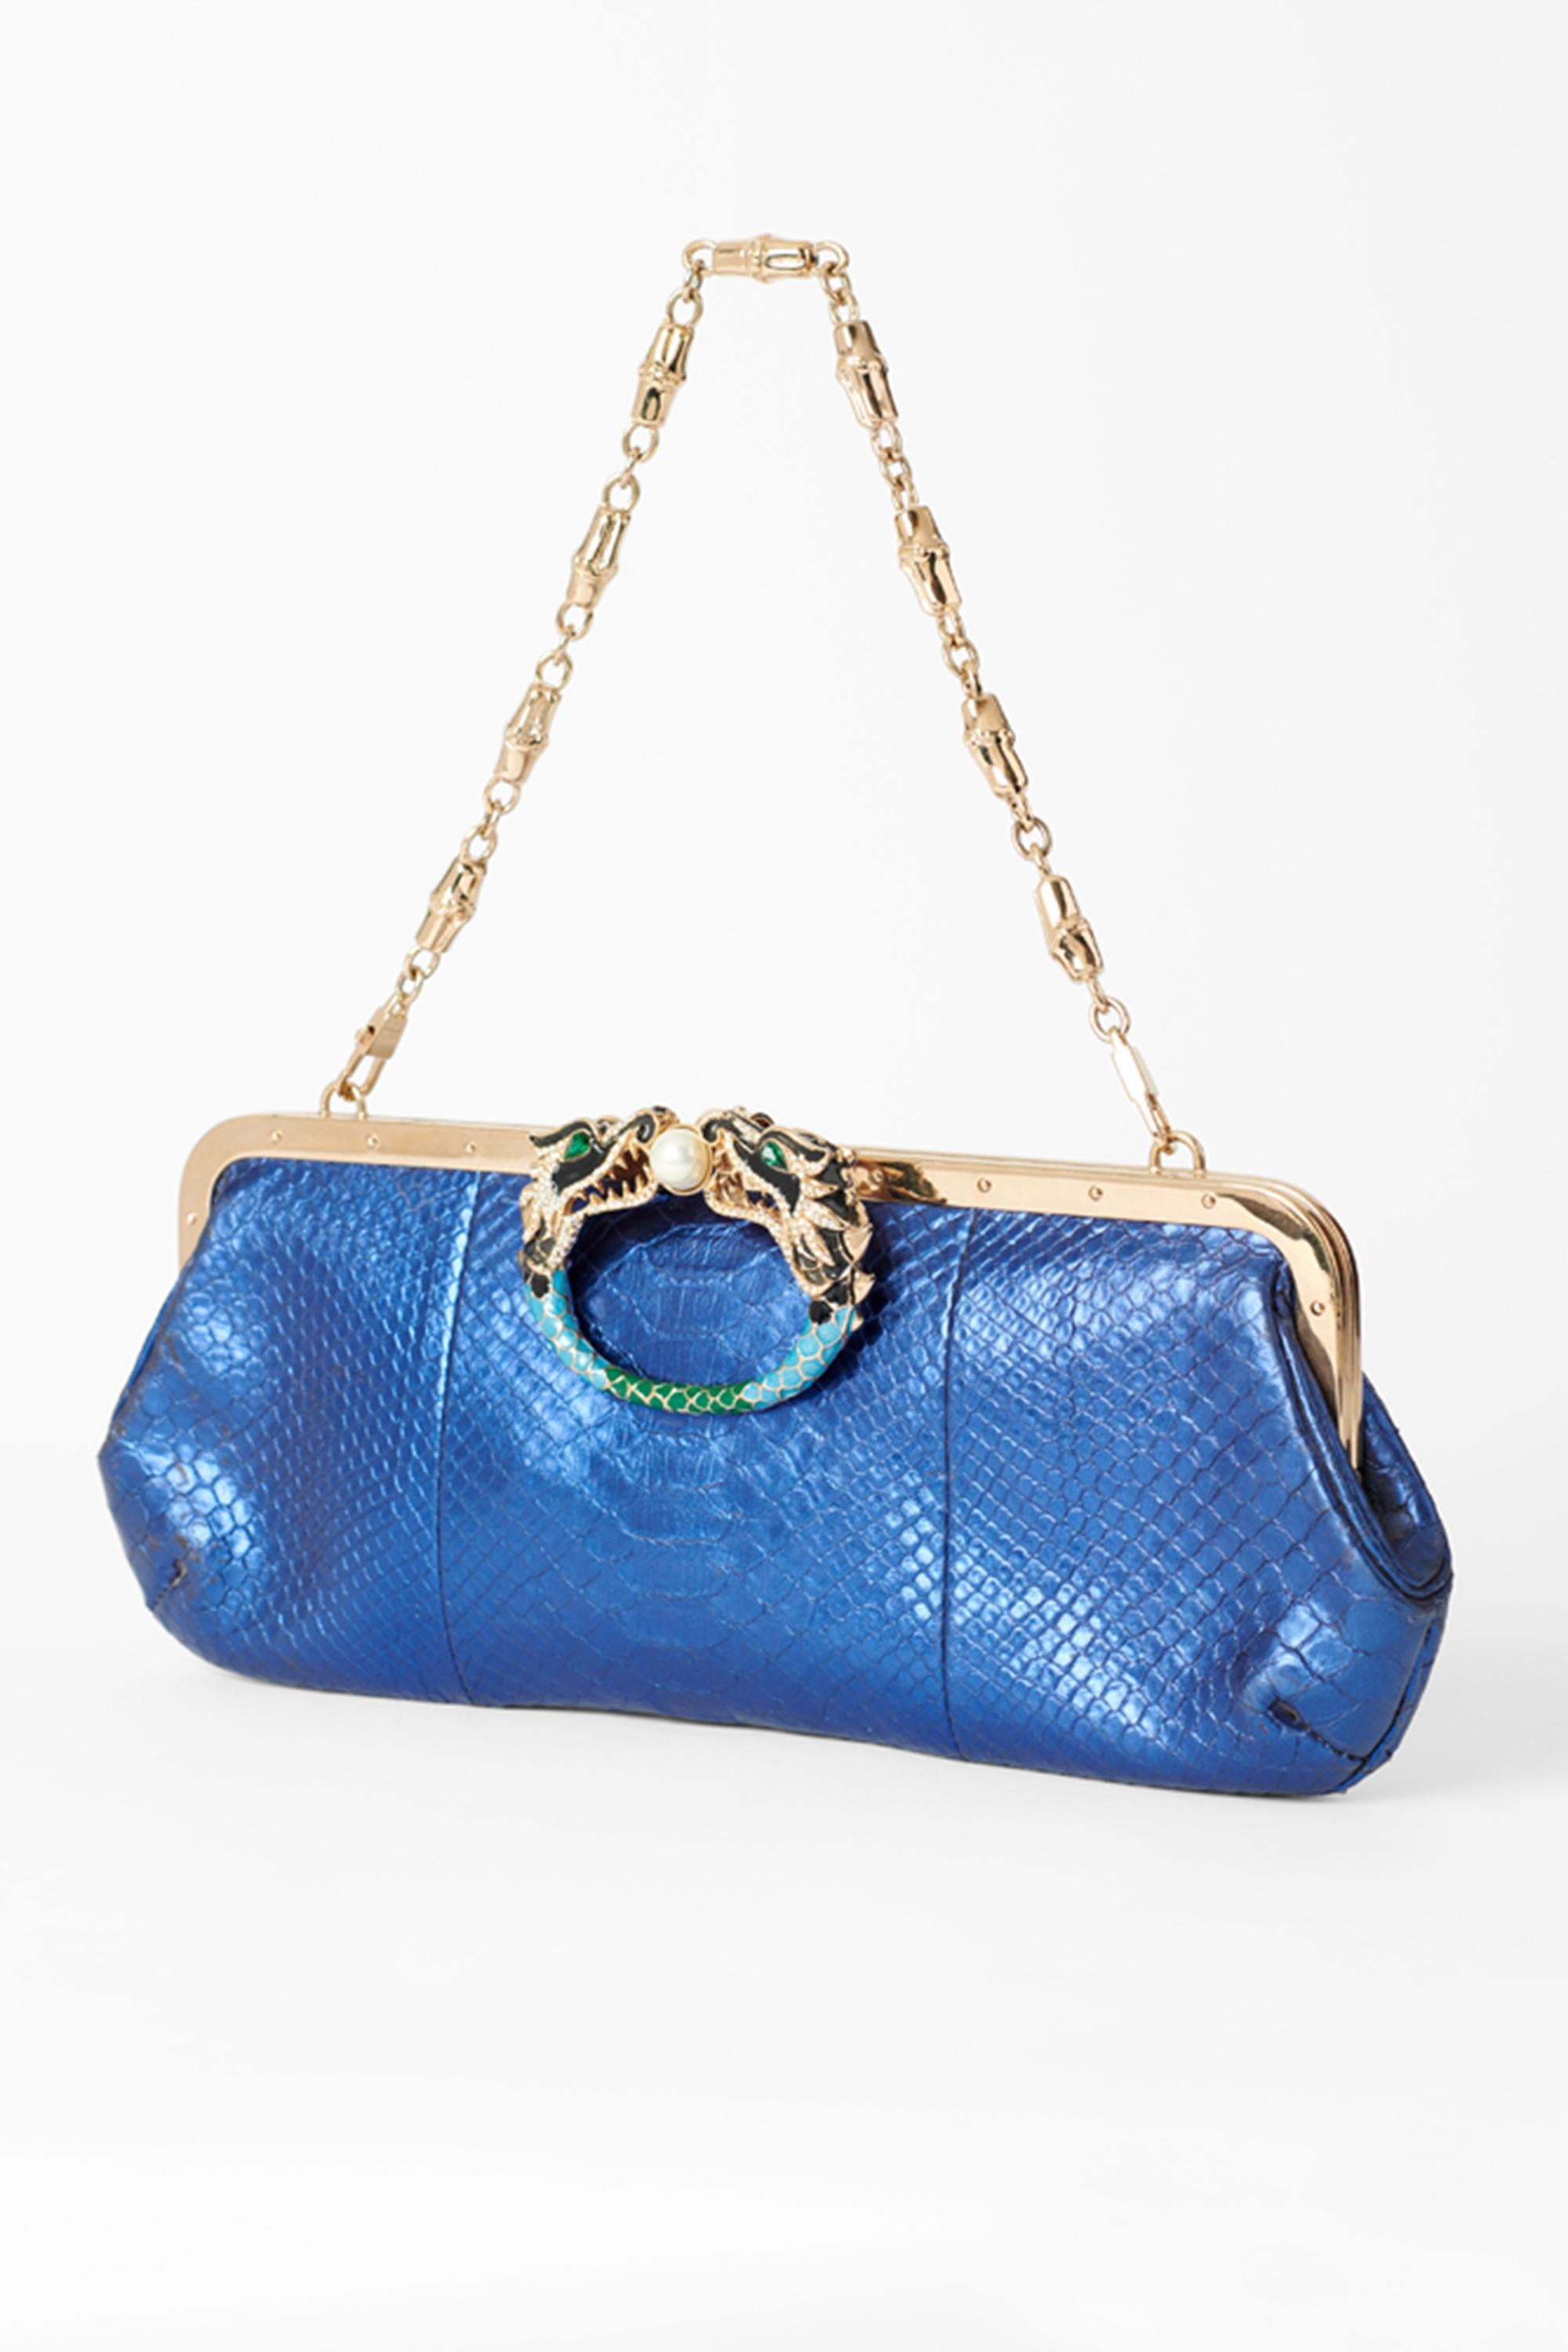 Gucci by Tom Ford Fall Winter 2004 blue clutch. Features embellished dragon centre with pearl centre, blue iridescent snake body, gold detachable shoulder chain and inside back pocket. In great vintage condition.

Brand: Gucci
Color: Blue
Year /